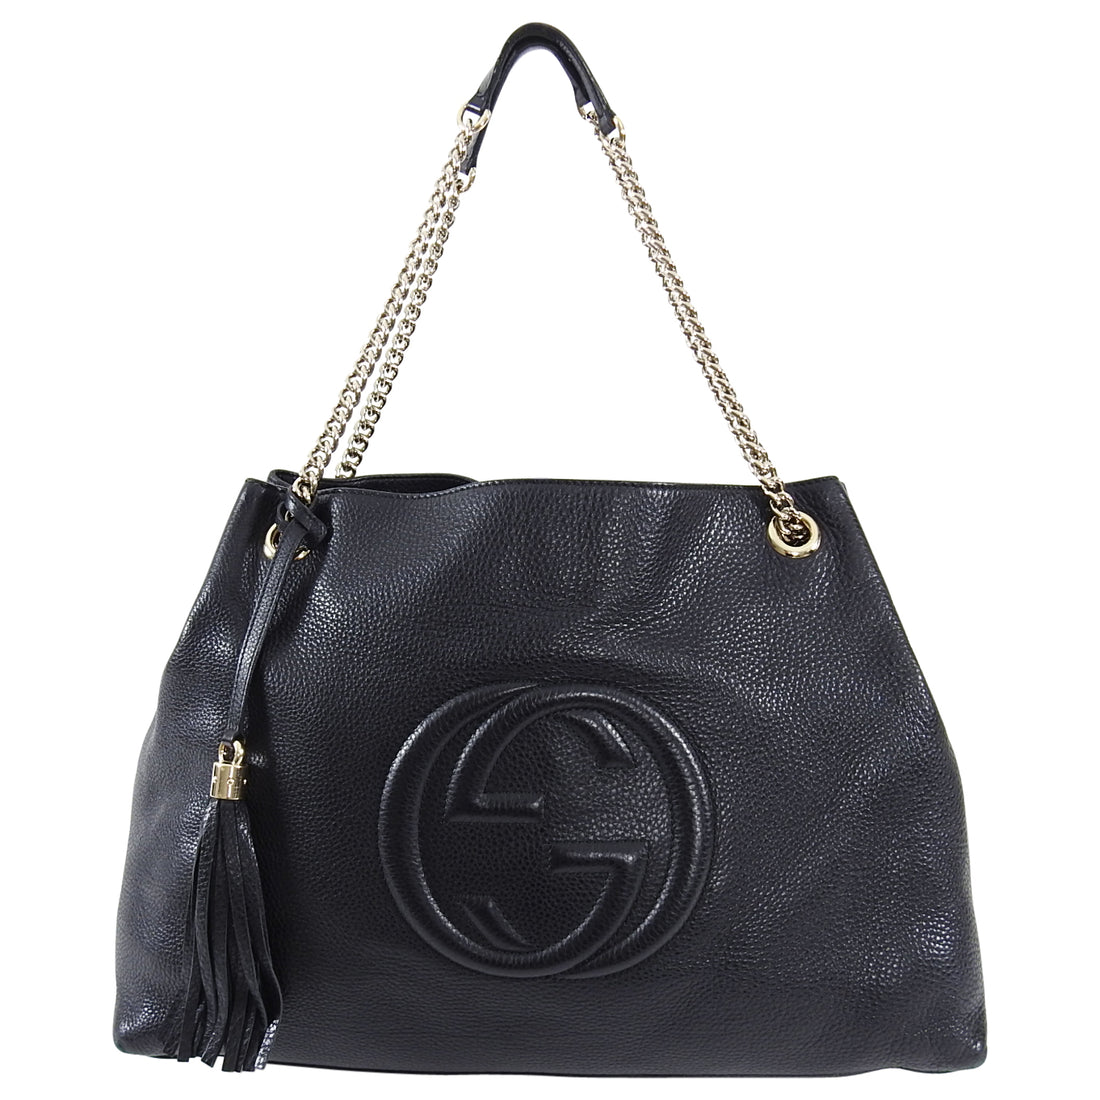 NWT!!! Gucci Soho Gg Chain Tote Satchel Black Embossed Leather Shoulder Bag